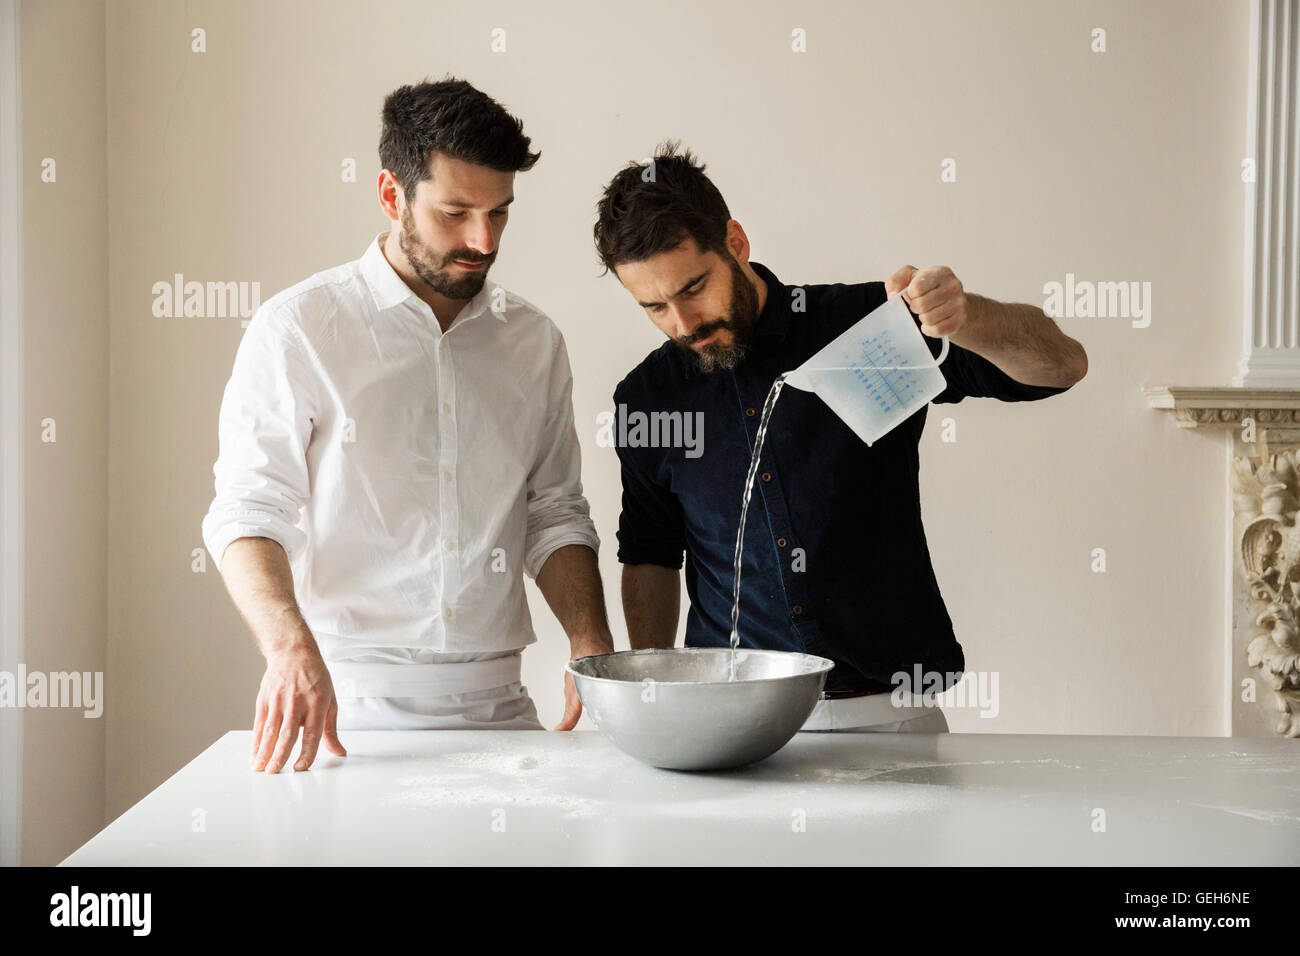 Two bakers standing at a table, preparing bread dough, pouring water from a measuring jug into a metal mixing bowl. Stock Photo